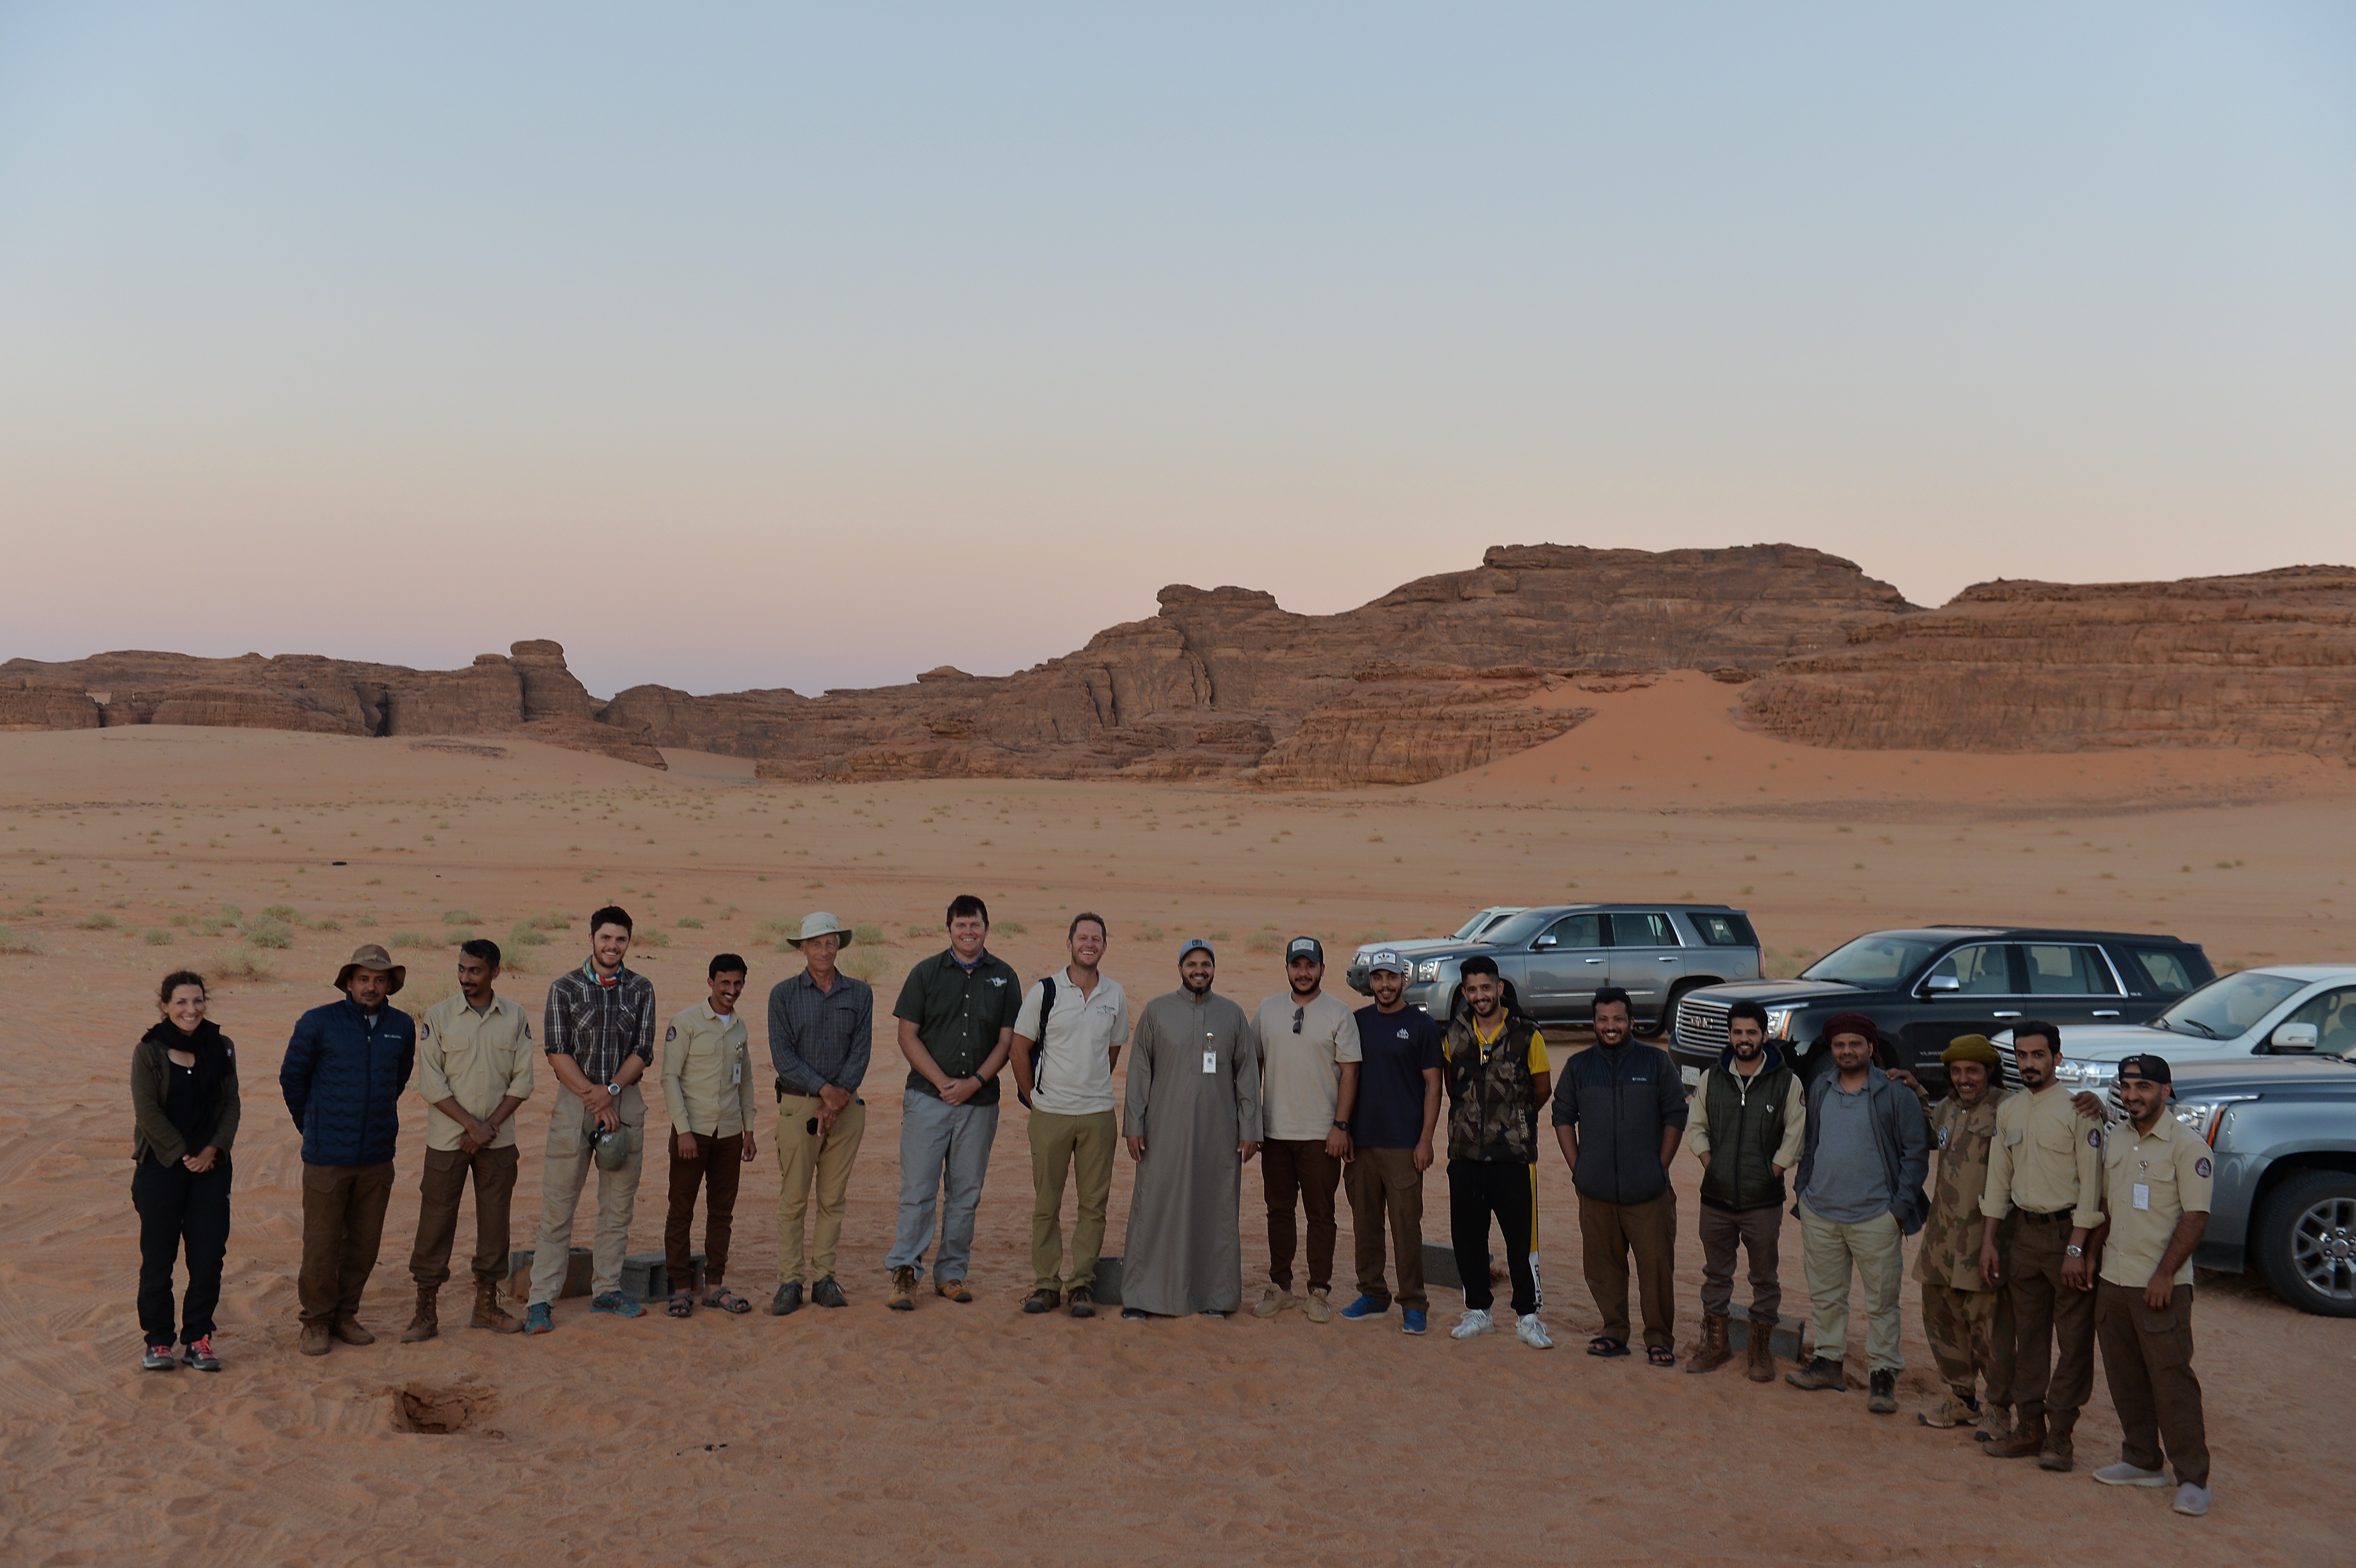 Panthera team and RCU rangers pose in the Sharaan Nature Reserve